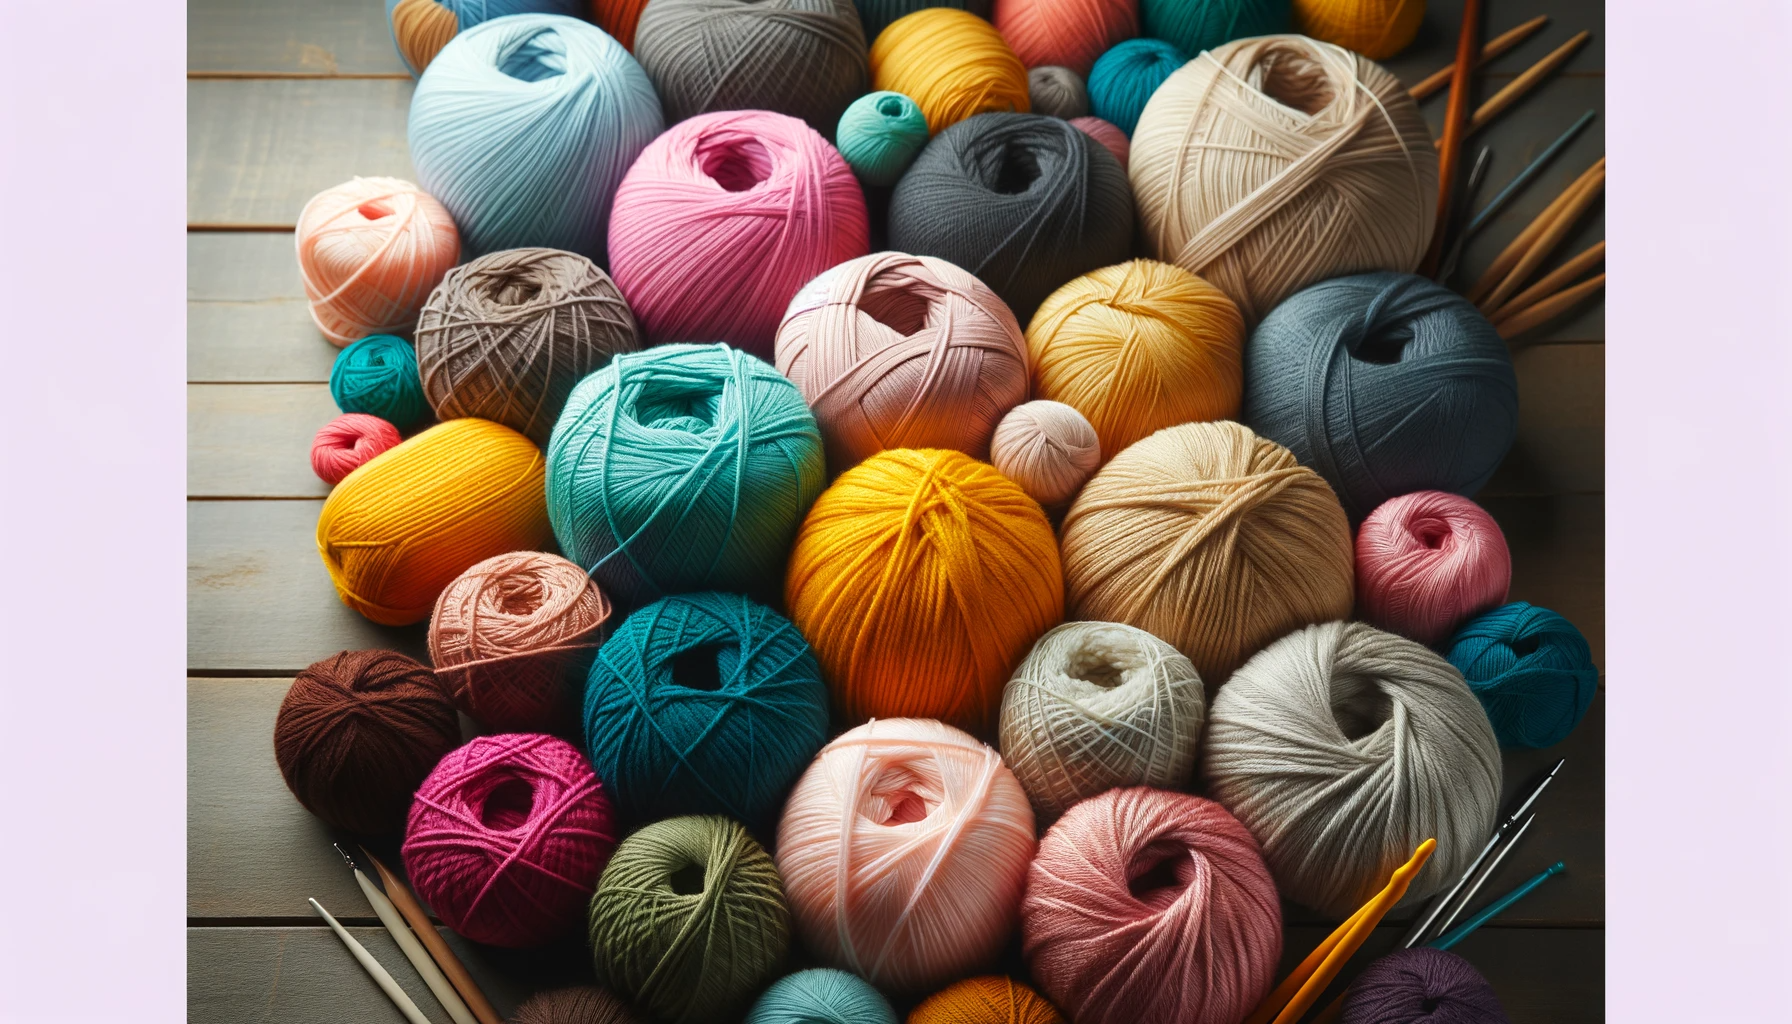 a collection of colorful yarn balls